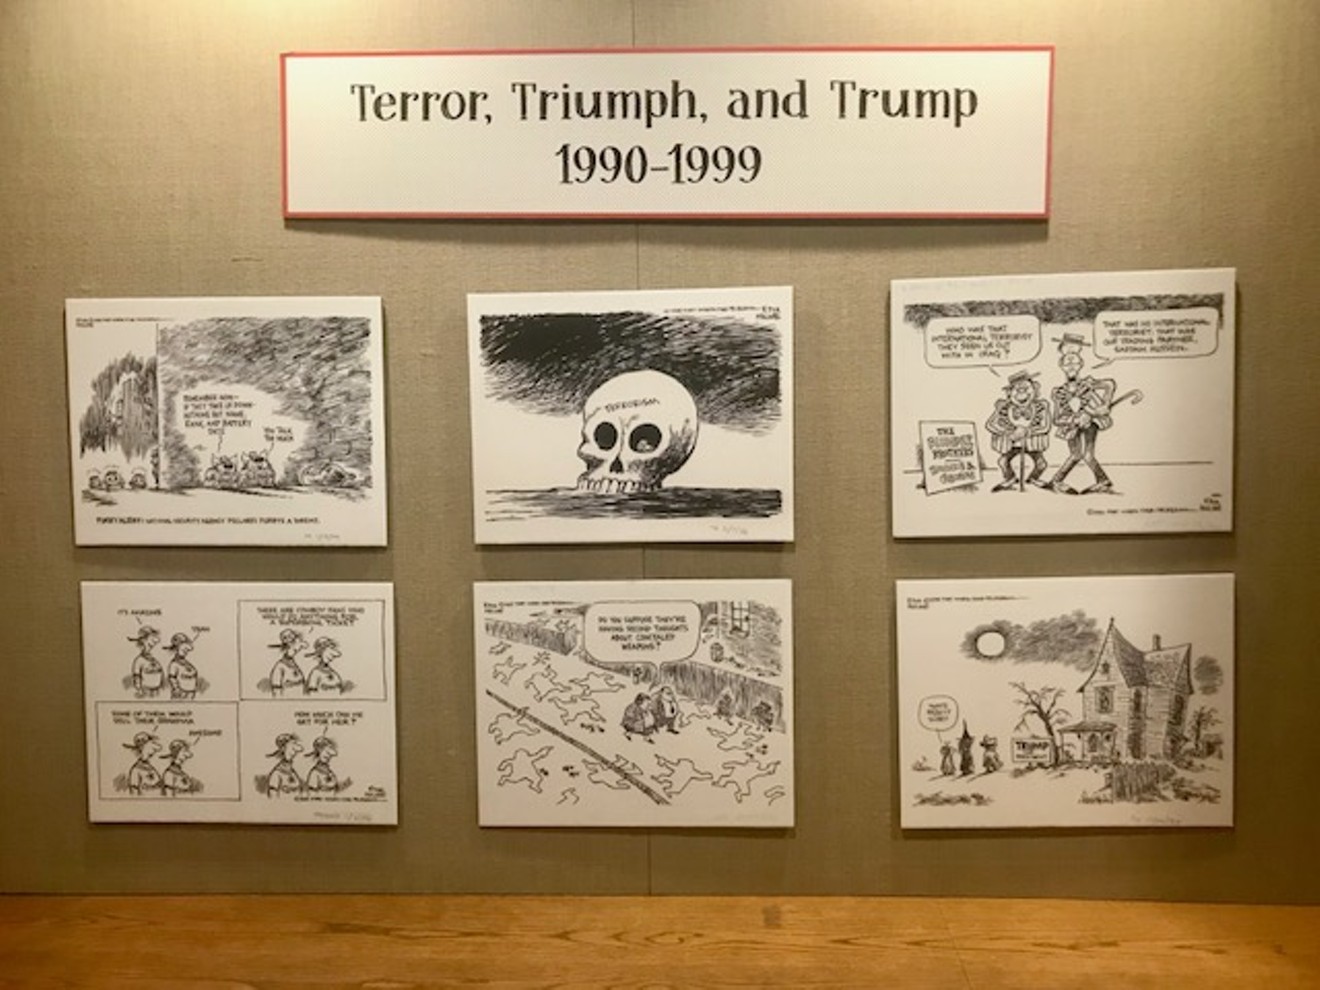 Etta Hulme began to introduce Donald Trump in her political cartoons as early as the '90s. Talk about foresight.